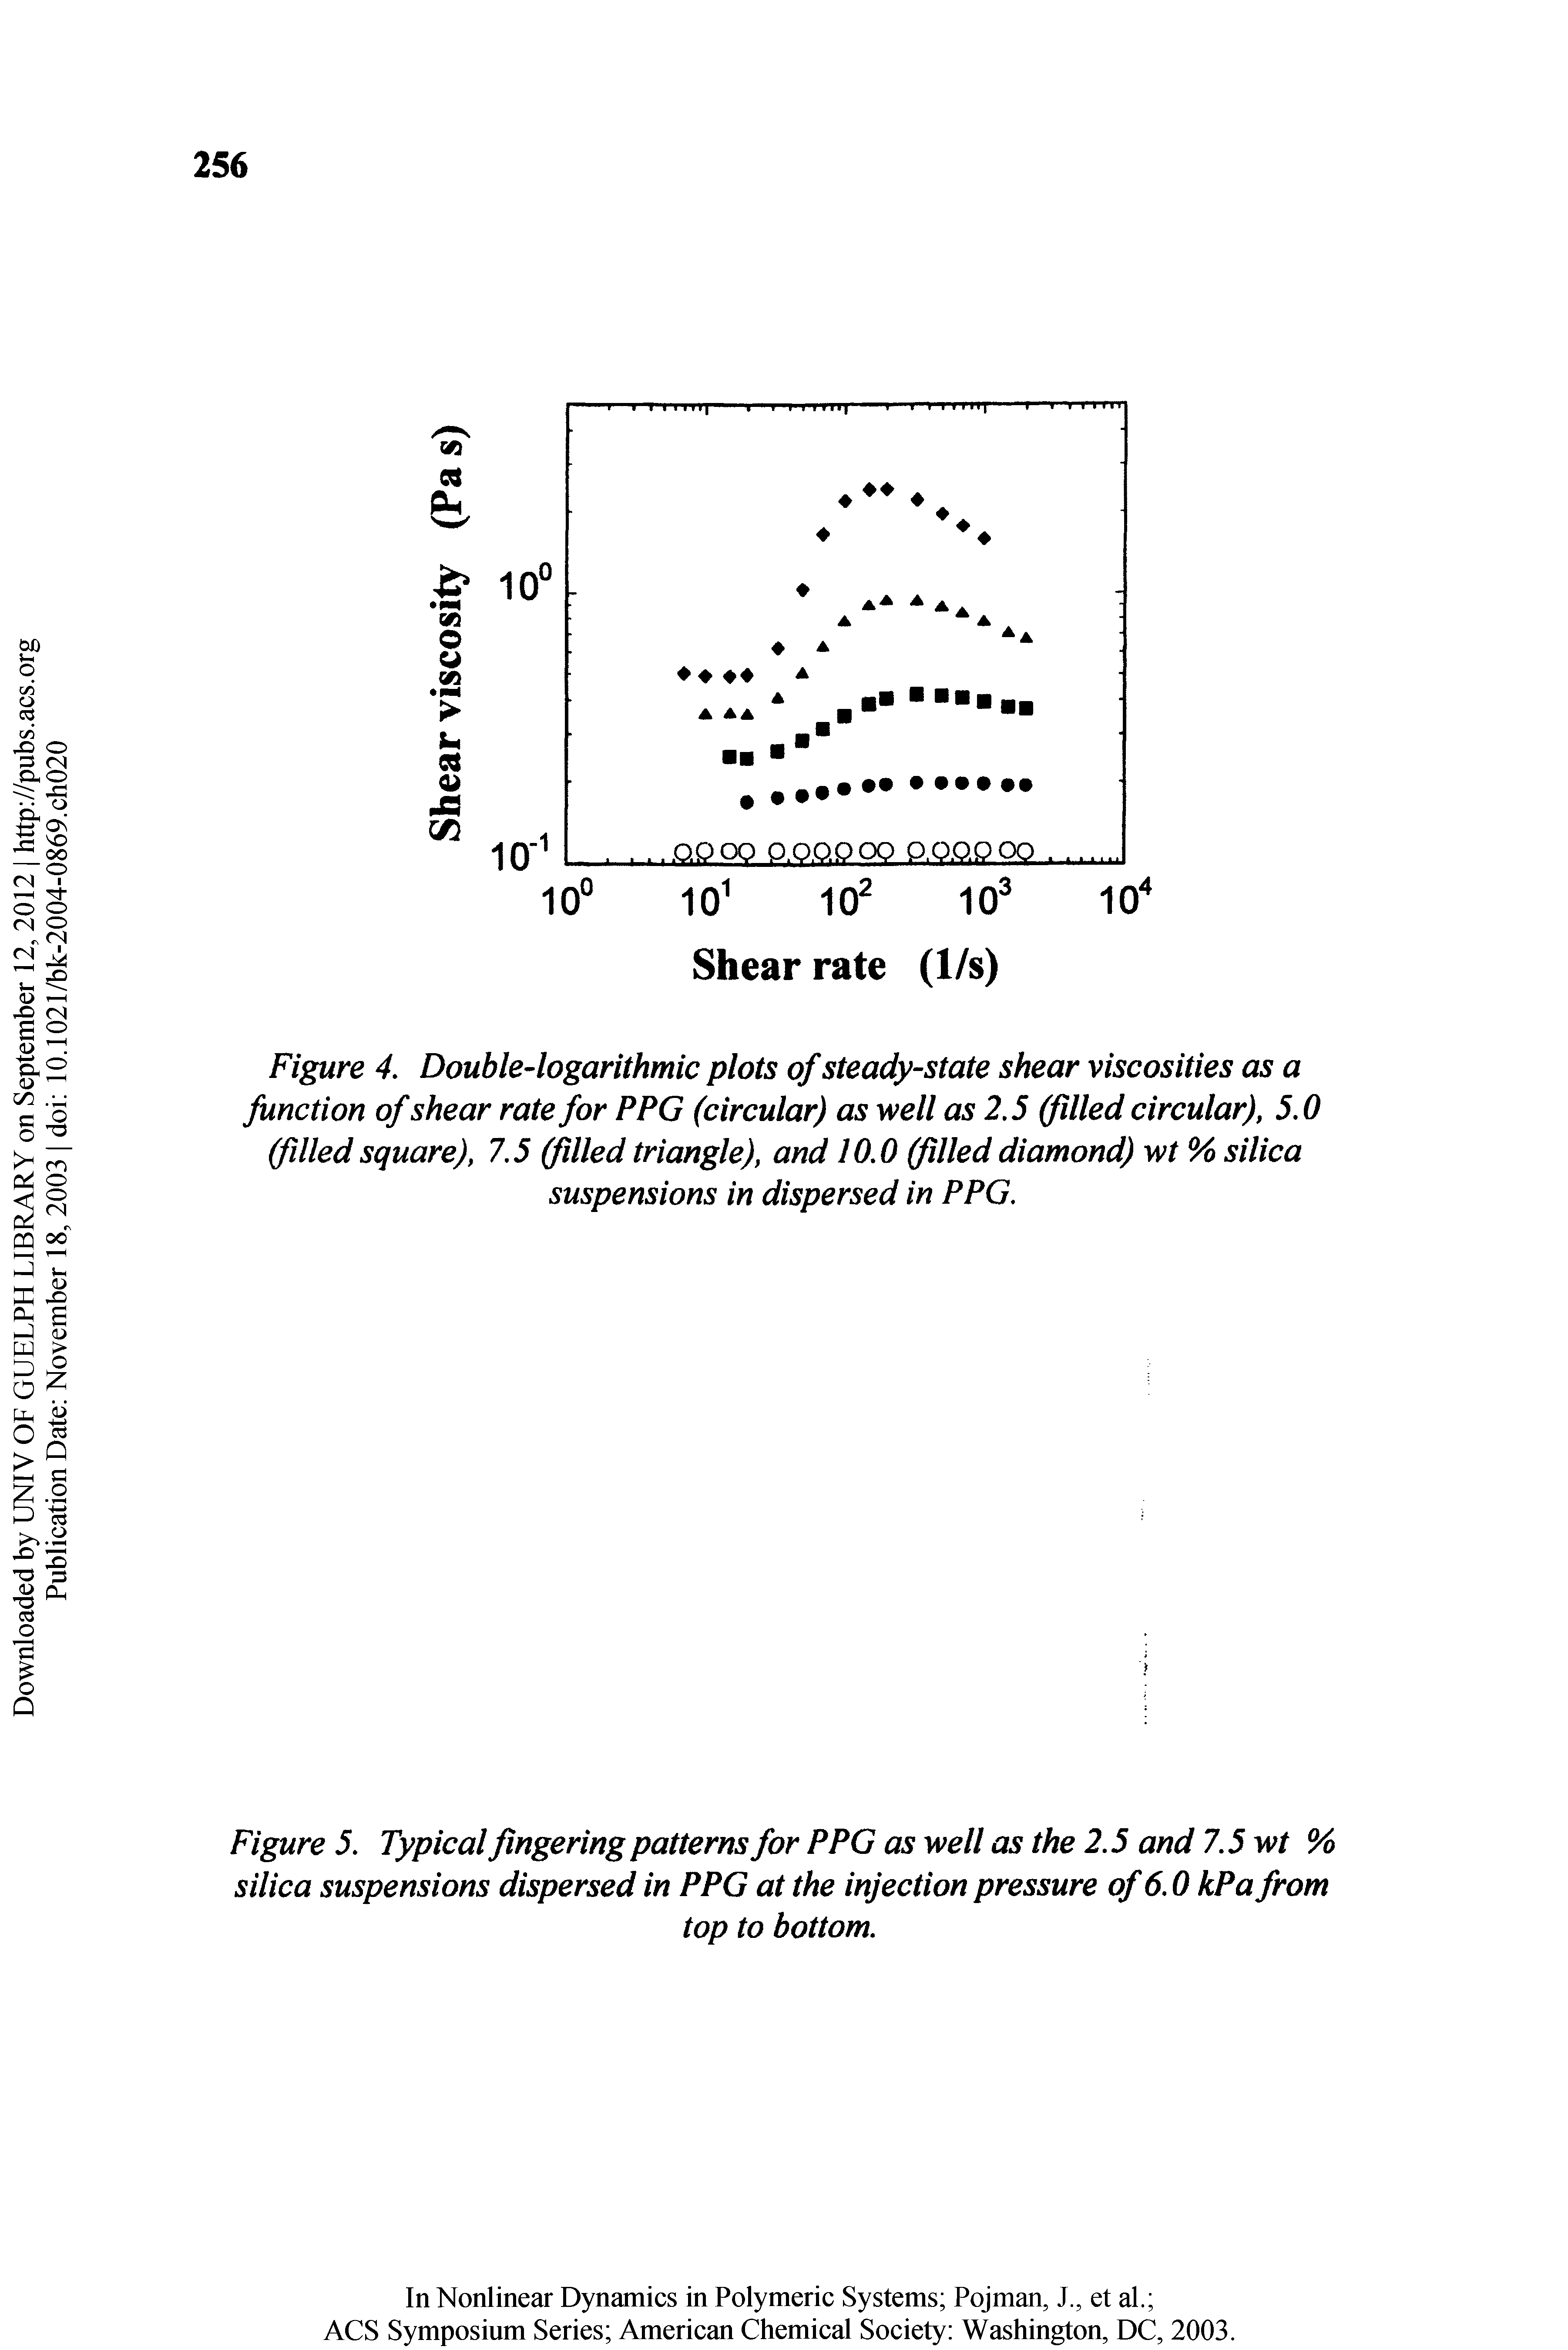 Figure 4, Double-logarithmic plots of steady-state shear viscosities as a function of shear rate for PPG (circular) as well as 2.5 (filled circular), 5.0 (filledsquare), 7.5 (filled triangle), and 10.0 (filleddiamond) wt % silica suspensions in dispersed in PPG.